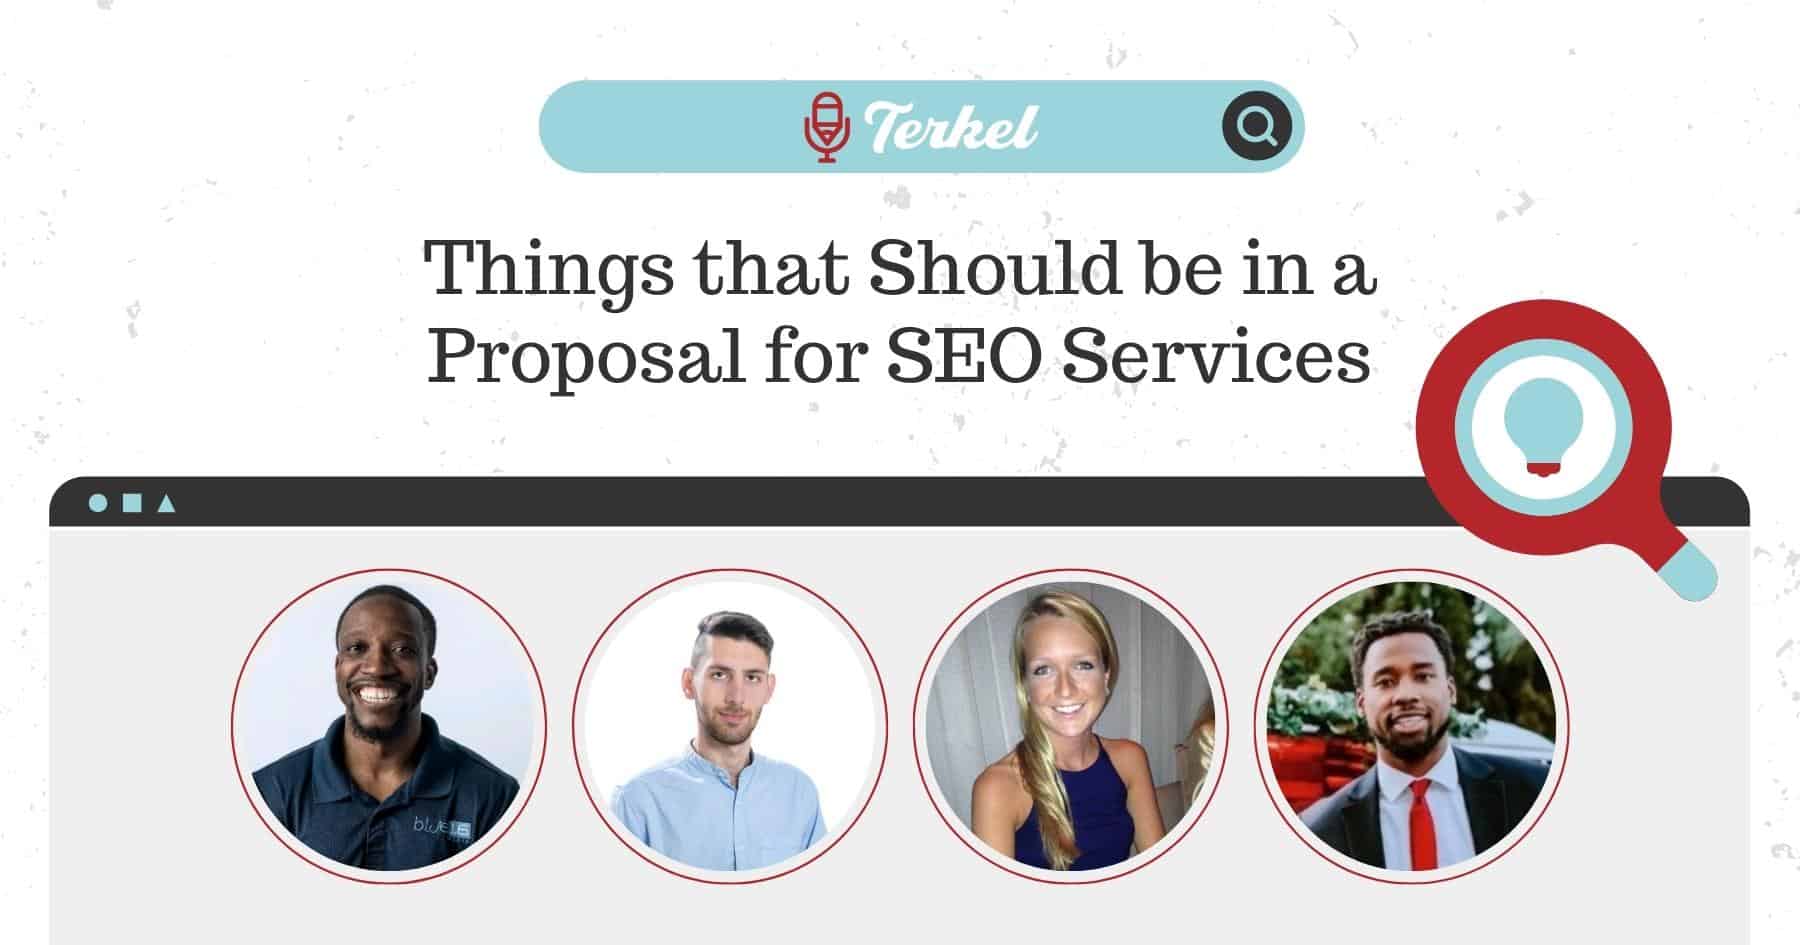 Things that Should be in a Proposal for SEO Services